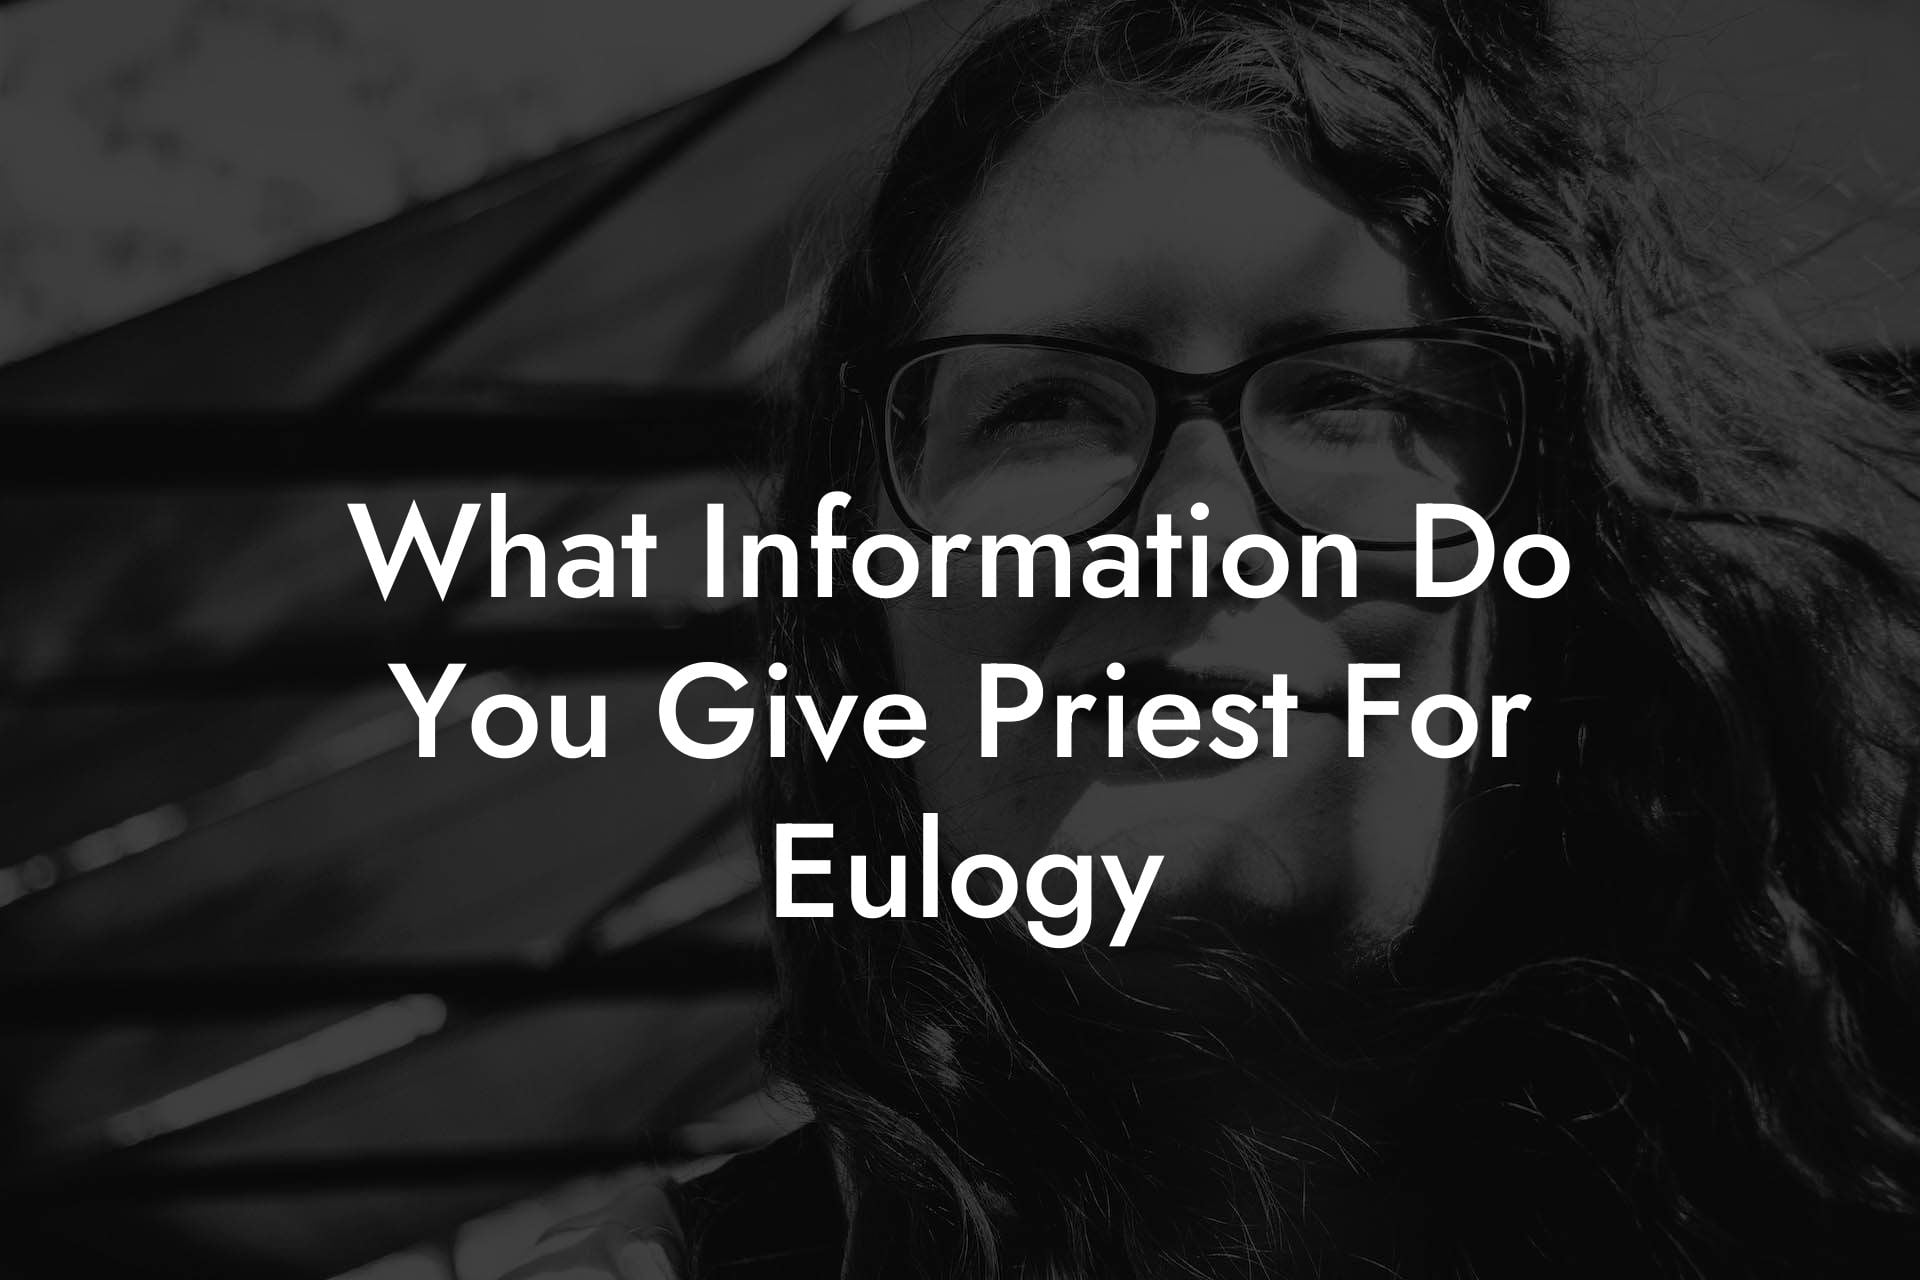 What Information Do You Give Priest For Eulogy